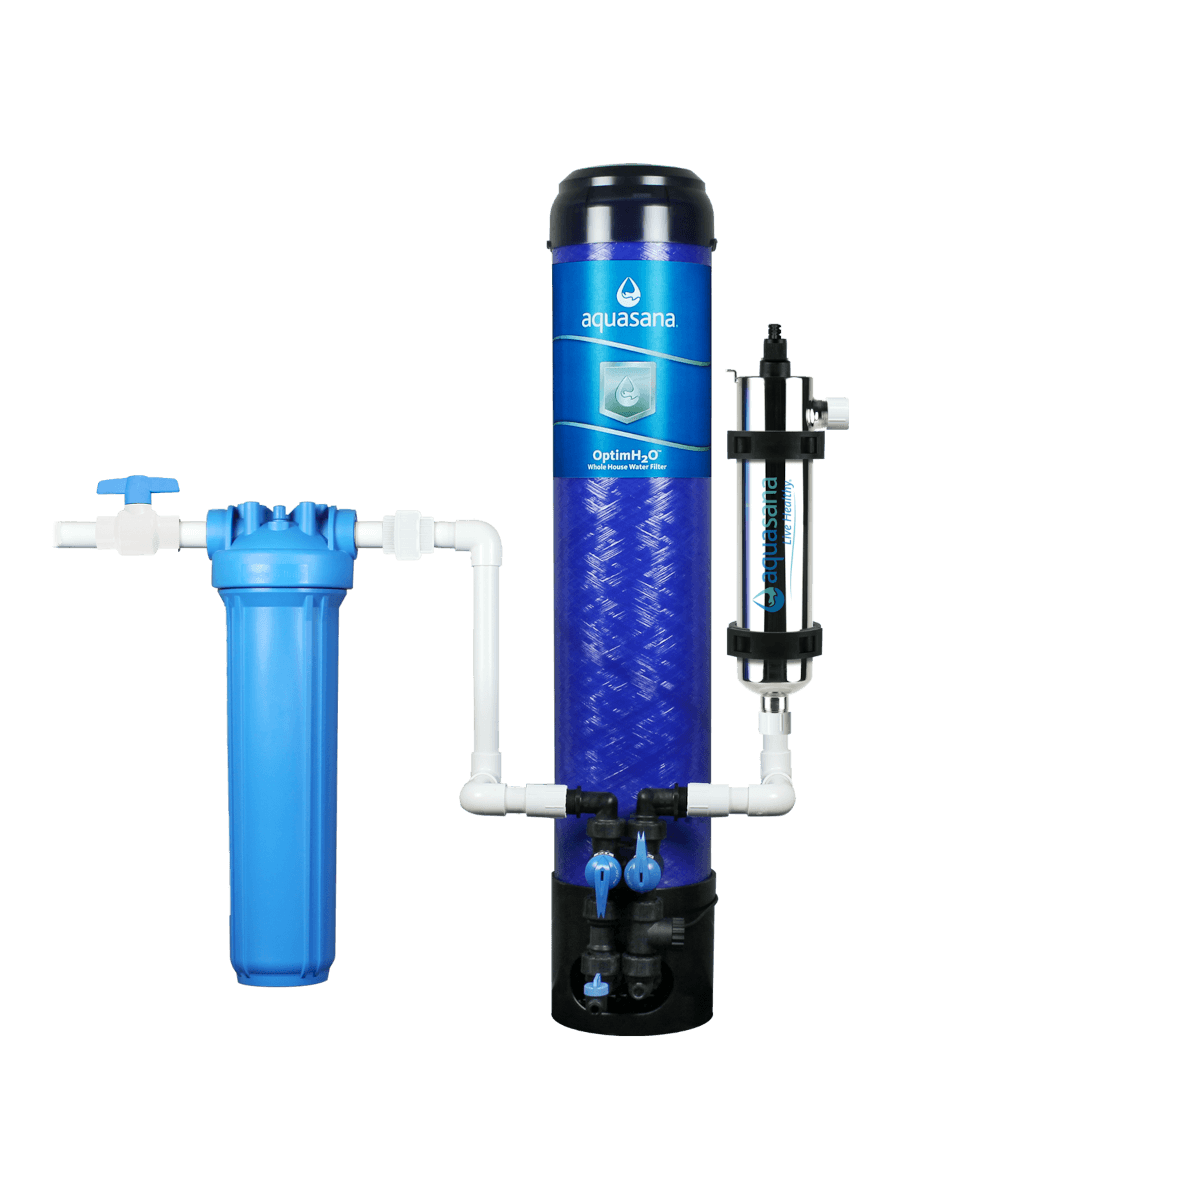 OptimH2O® Whole House Water Filter System For Home With UV Filter Removes 99% of Bacteria & Viruses Aquasana